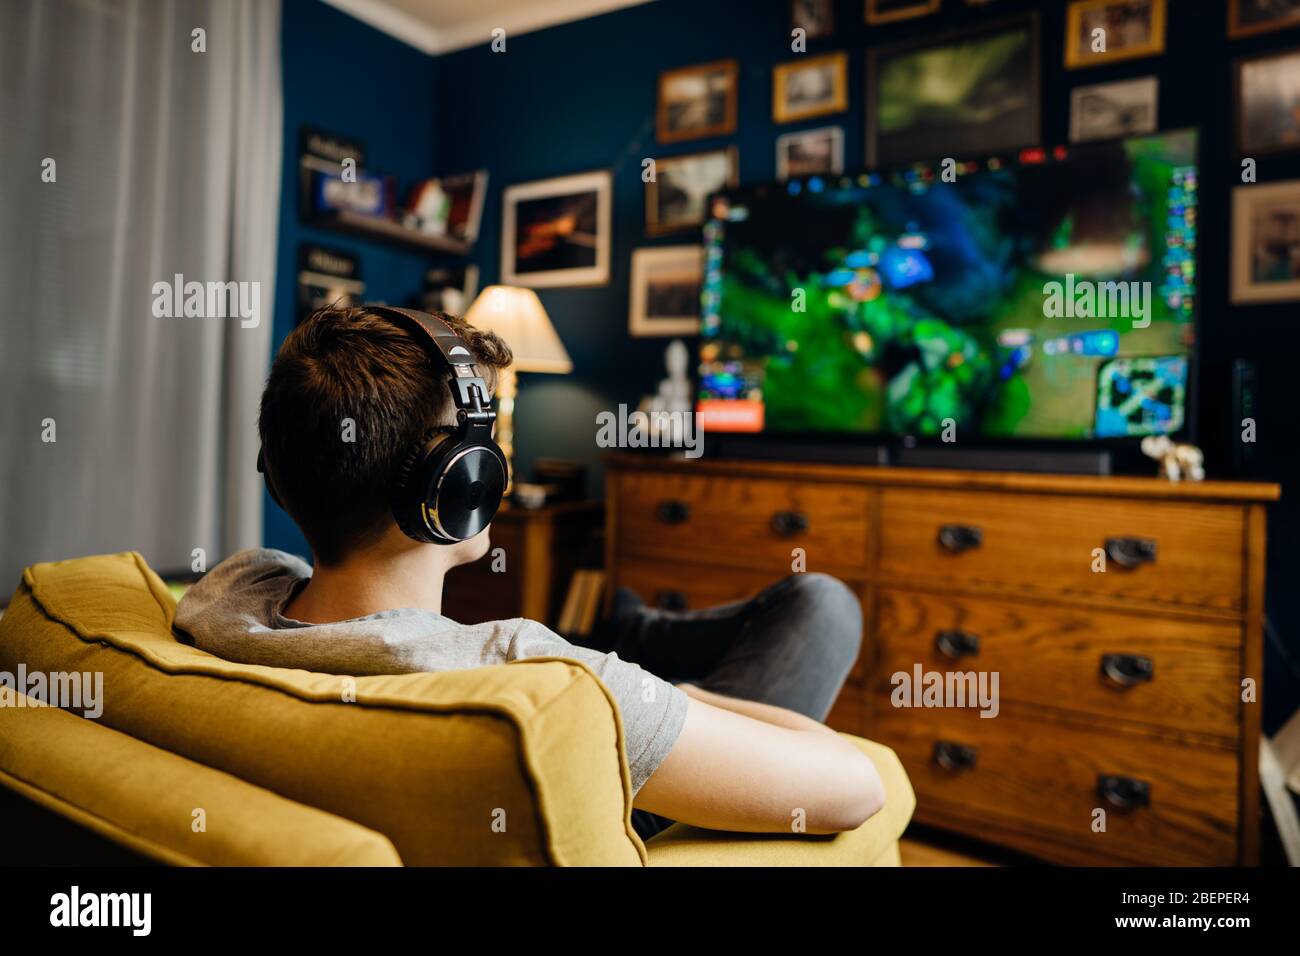 Adult gamer with headphones playing internet MMORPG cyber strategy online video game on computer gaming rig.Abstract virtual reality world.Spending ti Stock Photo